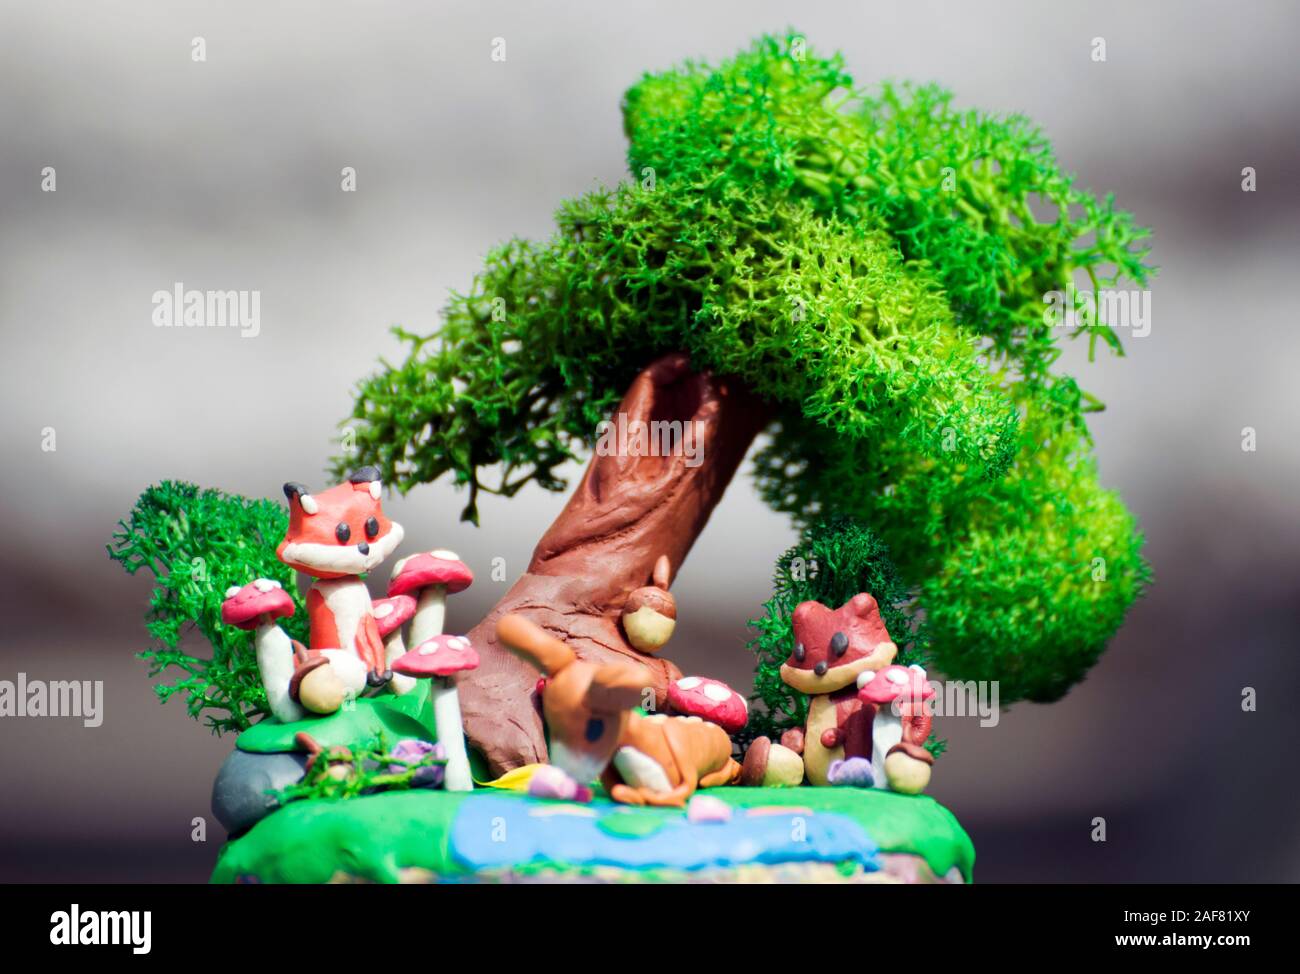 Arts and crafts: plasticine creative set representing animals in the forest: a fox and a squirrel looking at a deer drinking water from a pond. Stock Photo